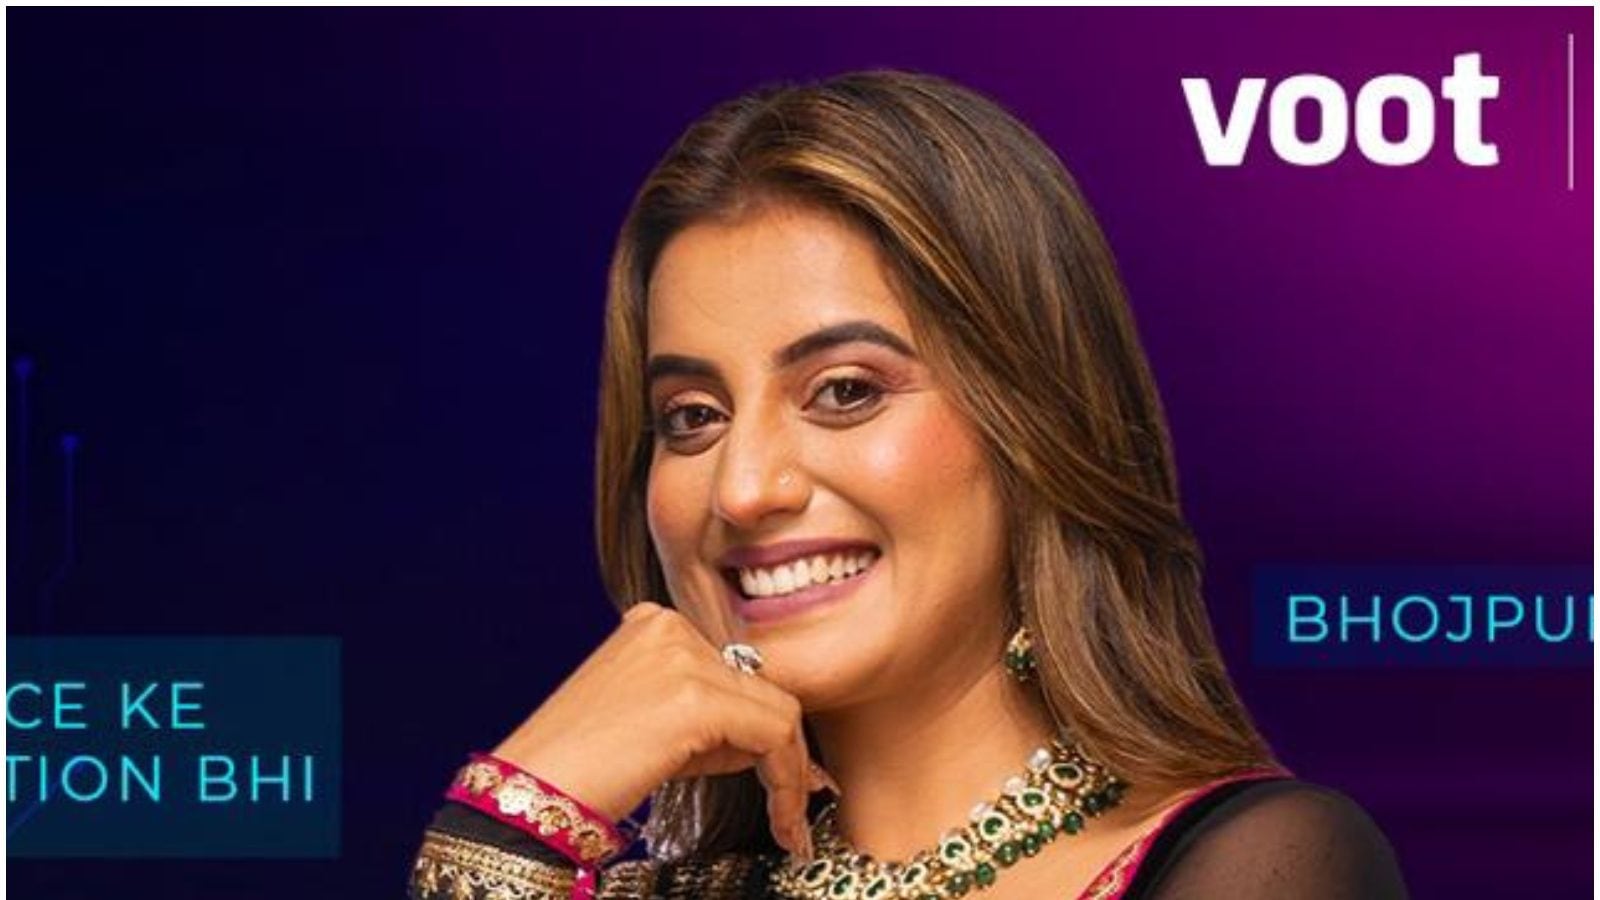 Full List of Contestants of Digital Chapter of Reality Show on Voot